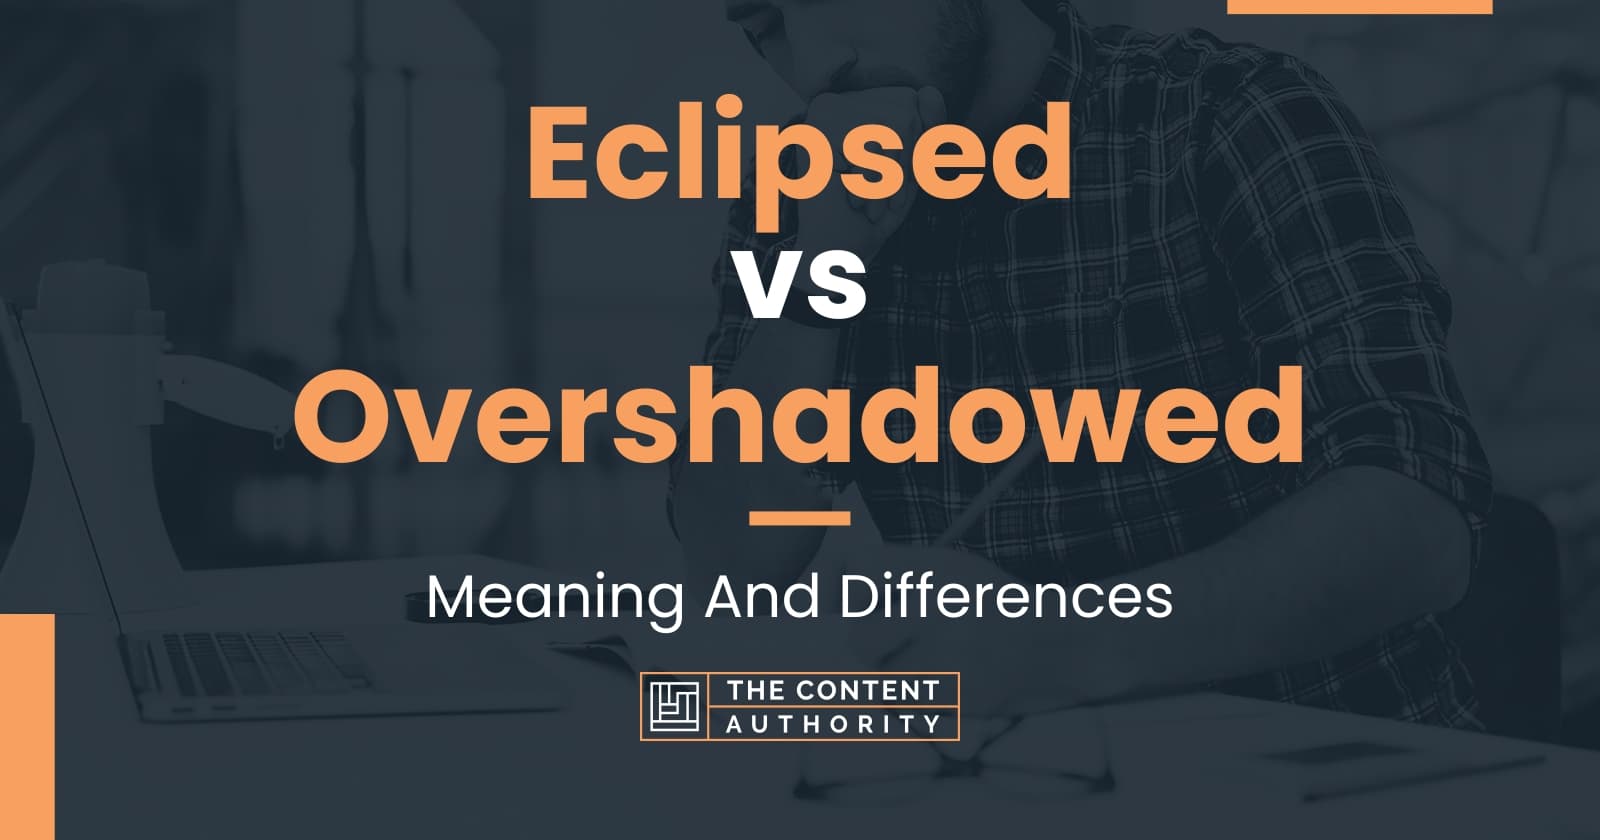 Eclipsed vs Overshadowed Meaning And Differences